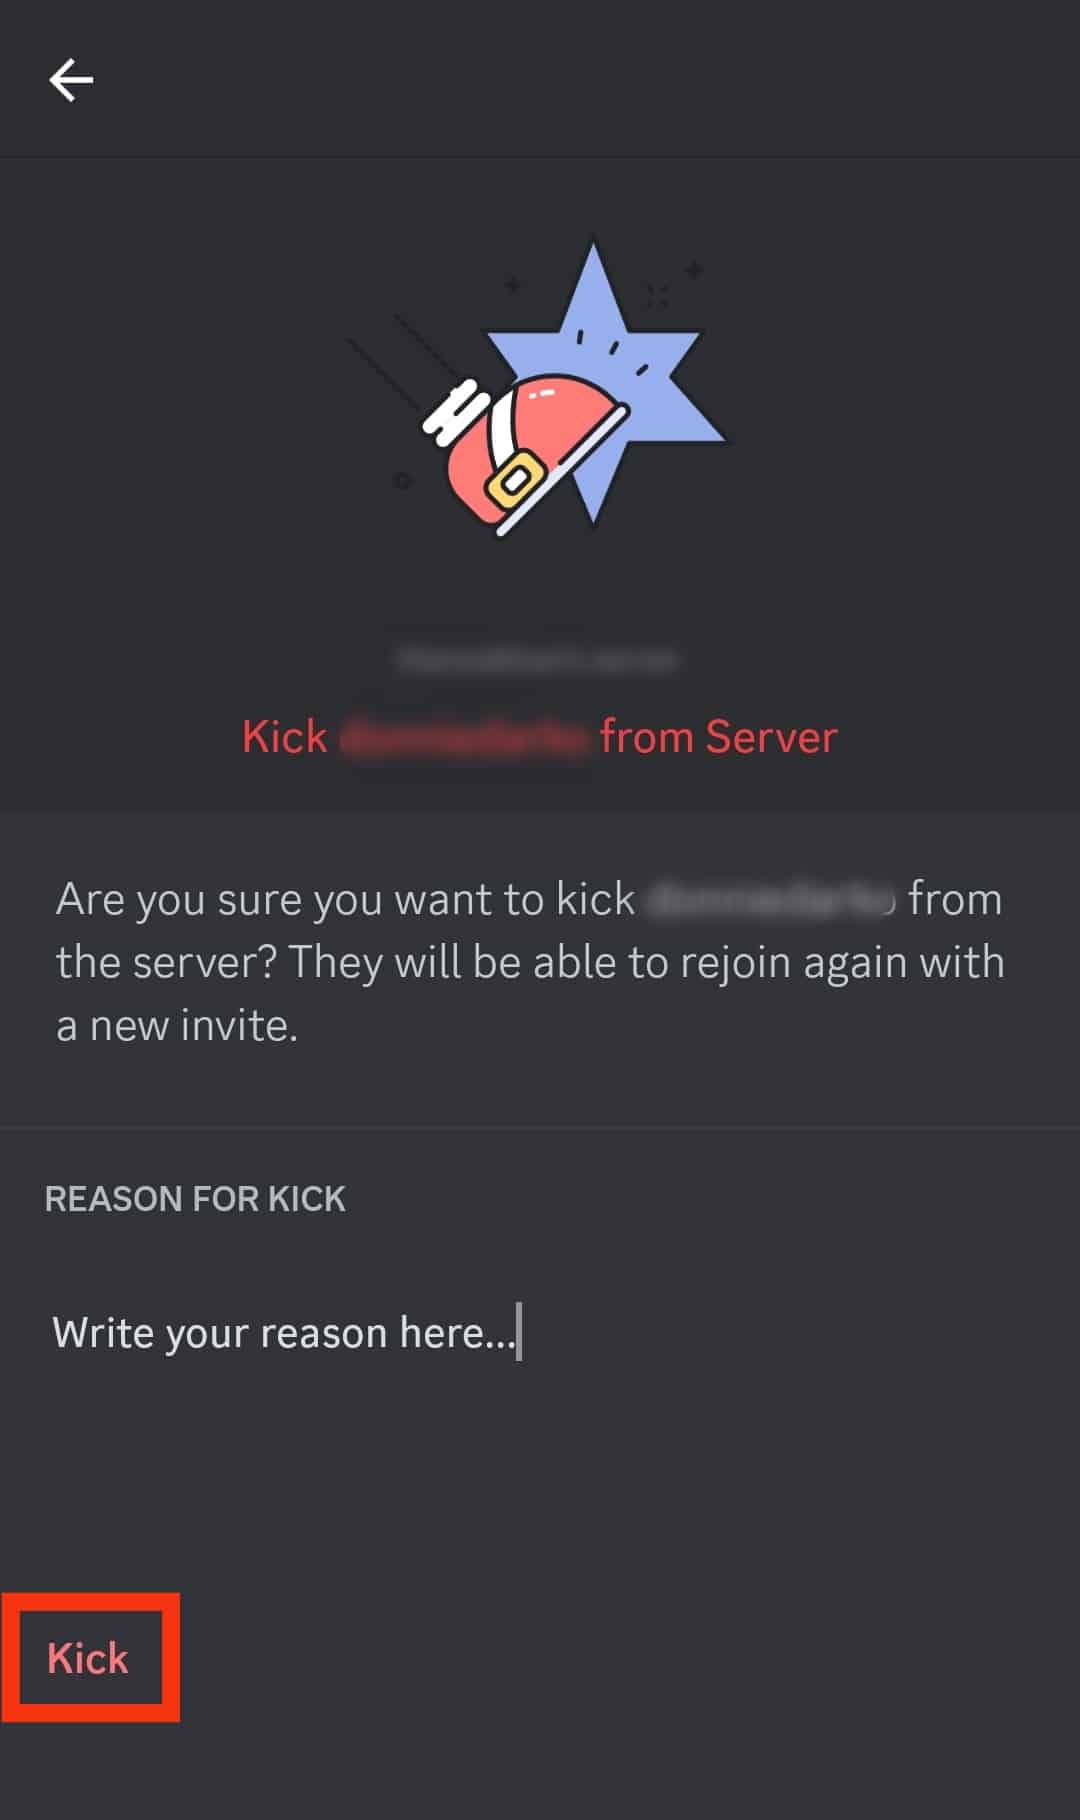 Tap On Kick To Confirm The Action